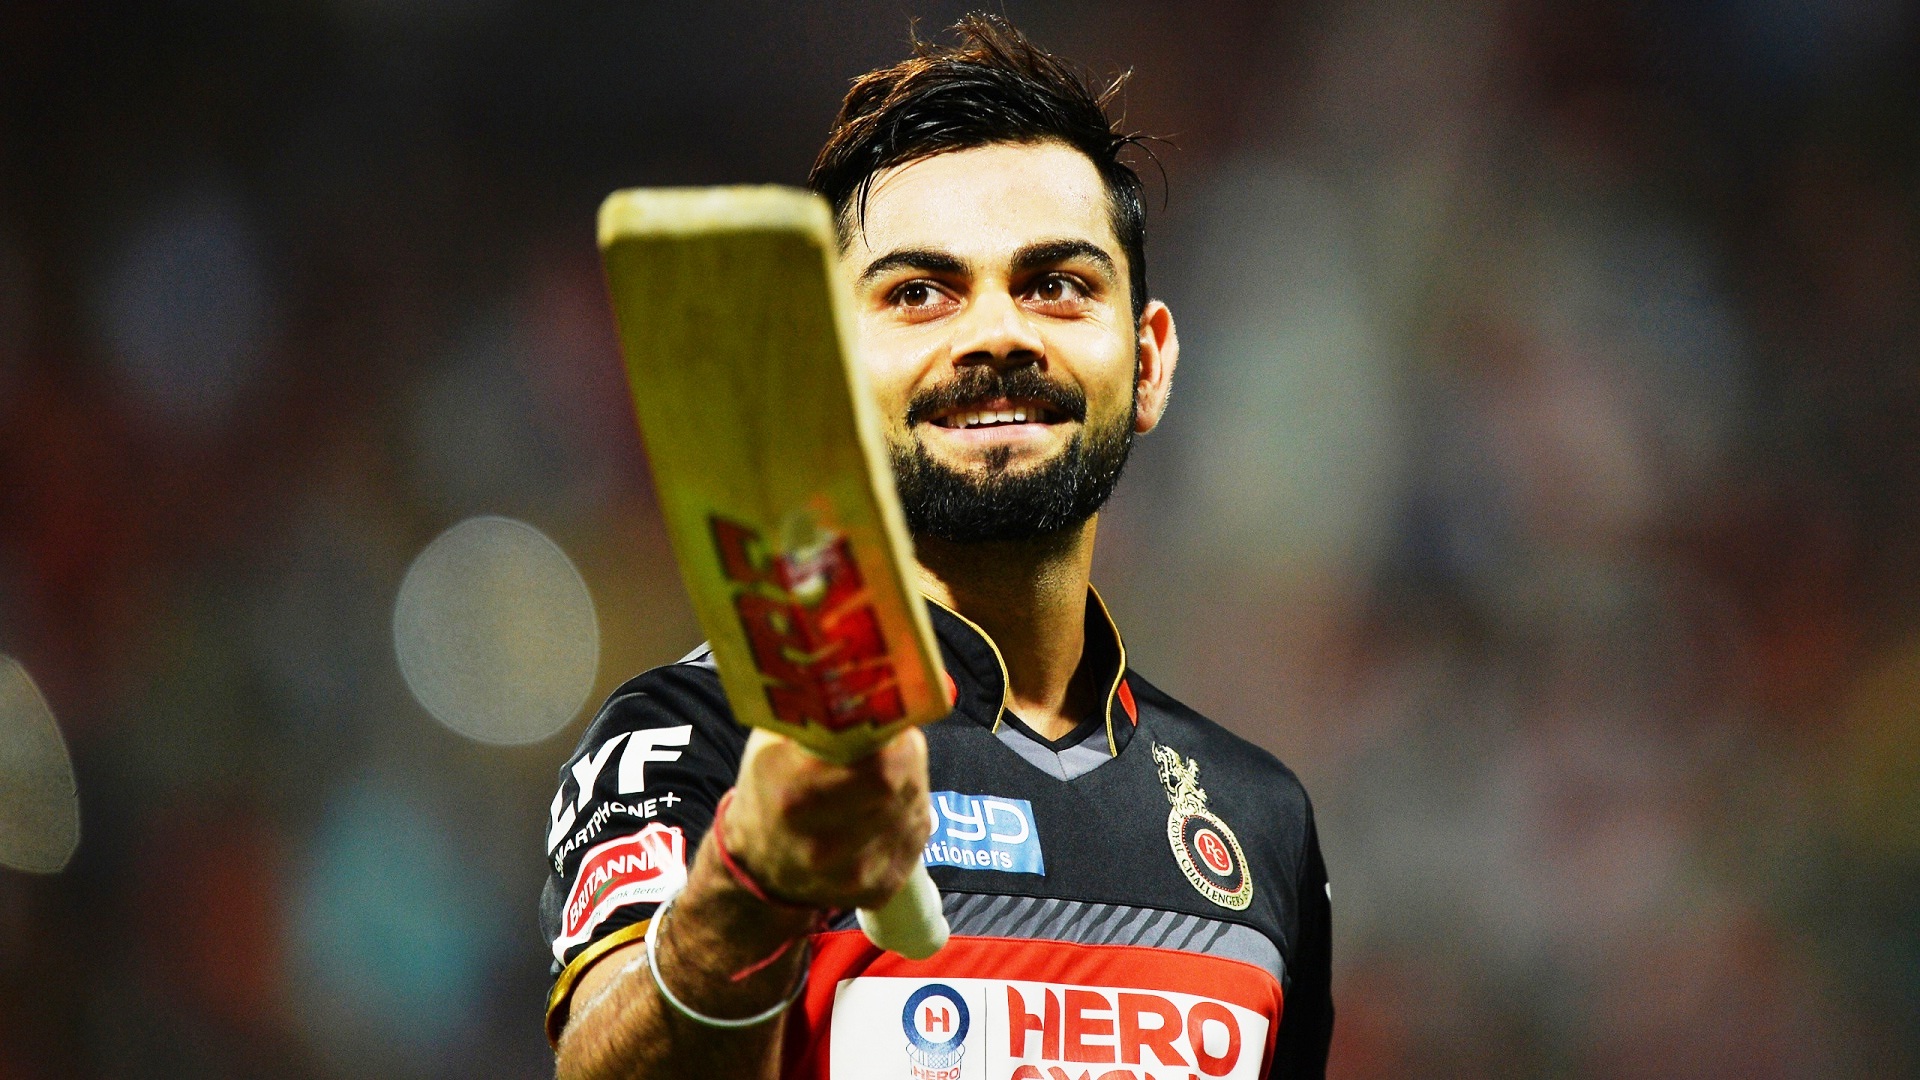 20 Best Virat Kohli Images Pictures and HD Wallpapers 2017